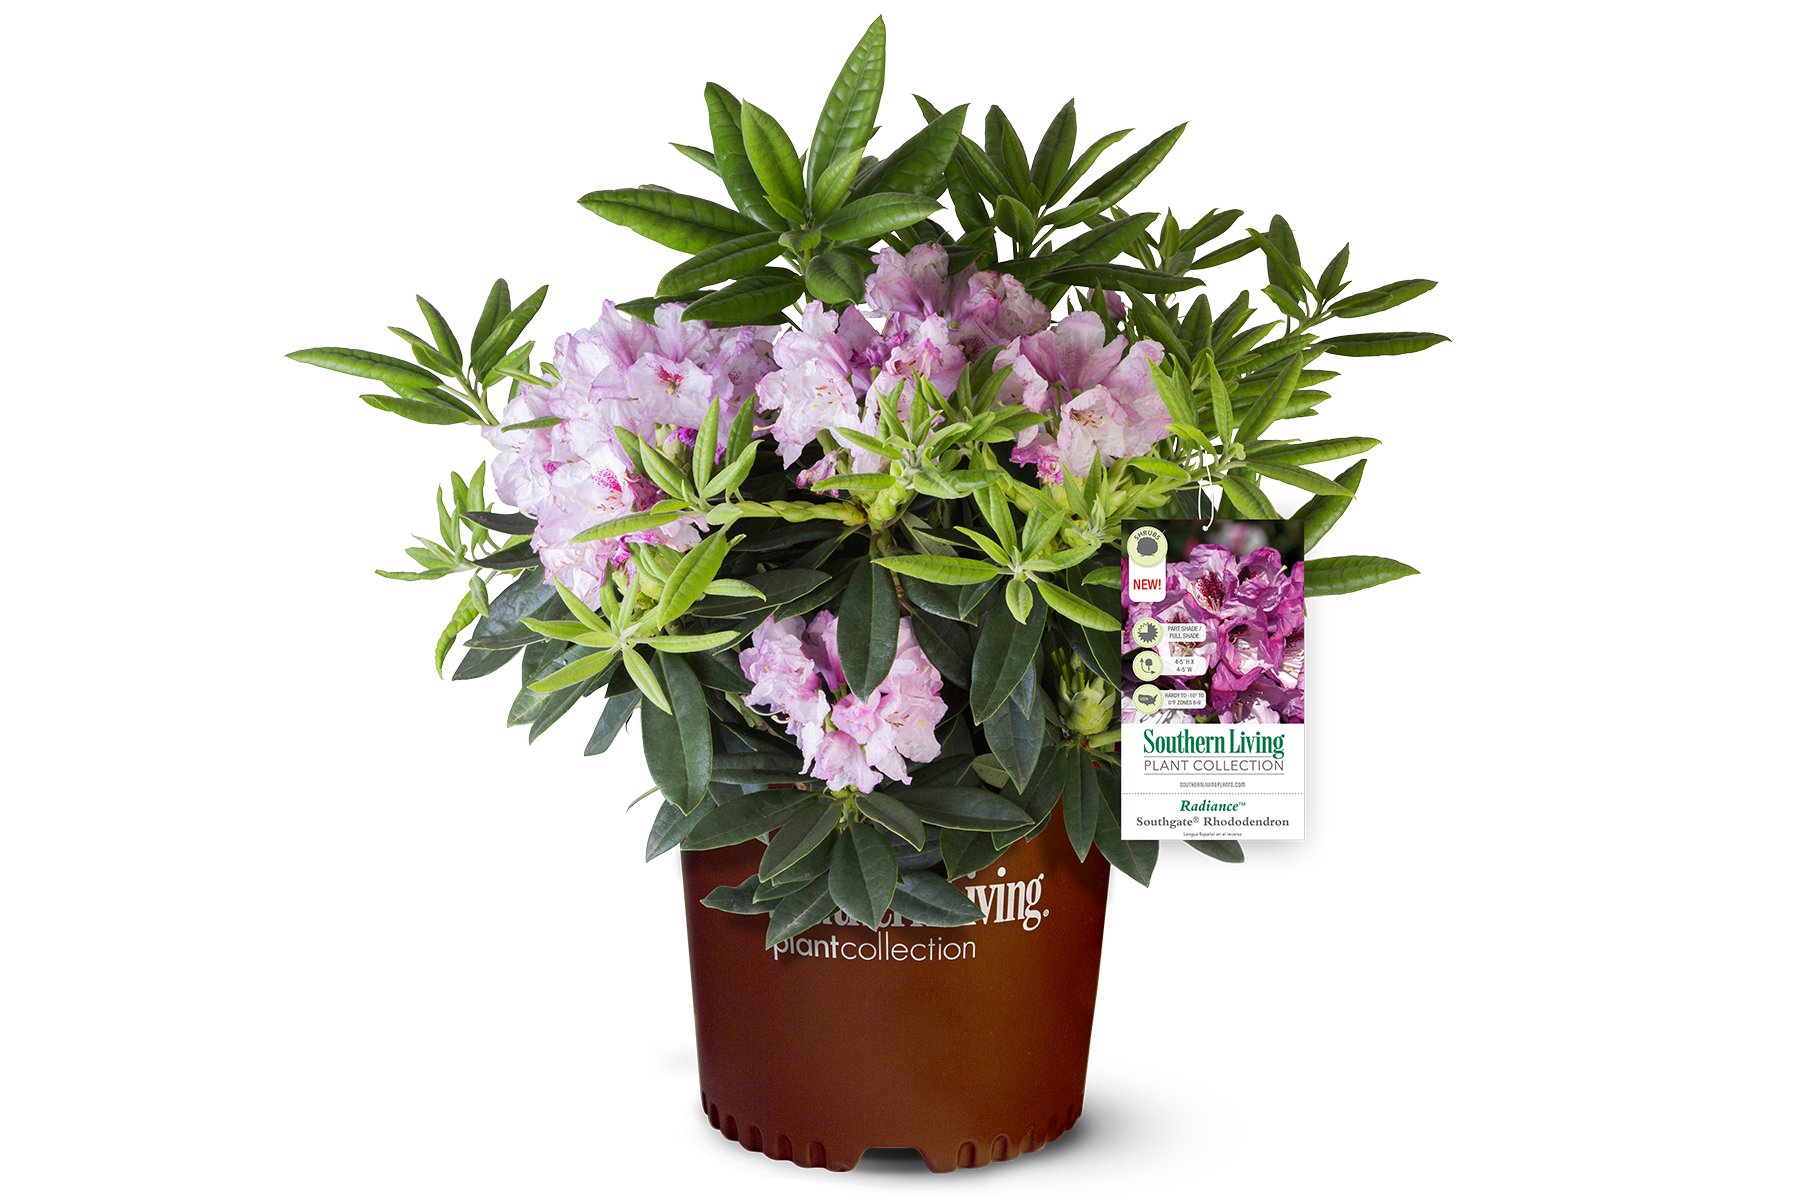 Rhododendron_Southgate_Radiance_Clipped_20180309_w-tag_X21A8721_1800x1200.png